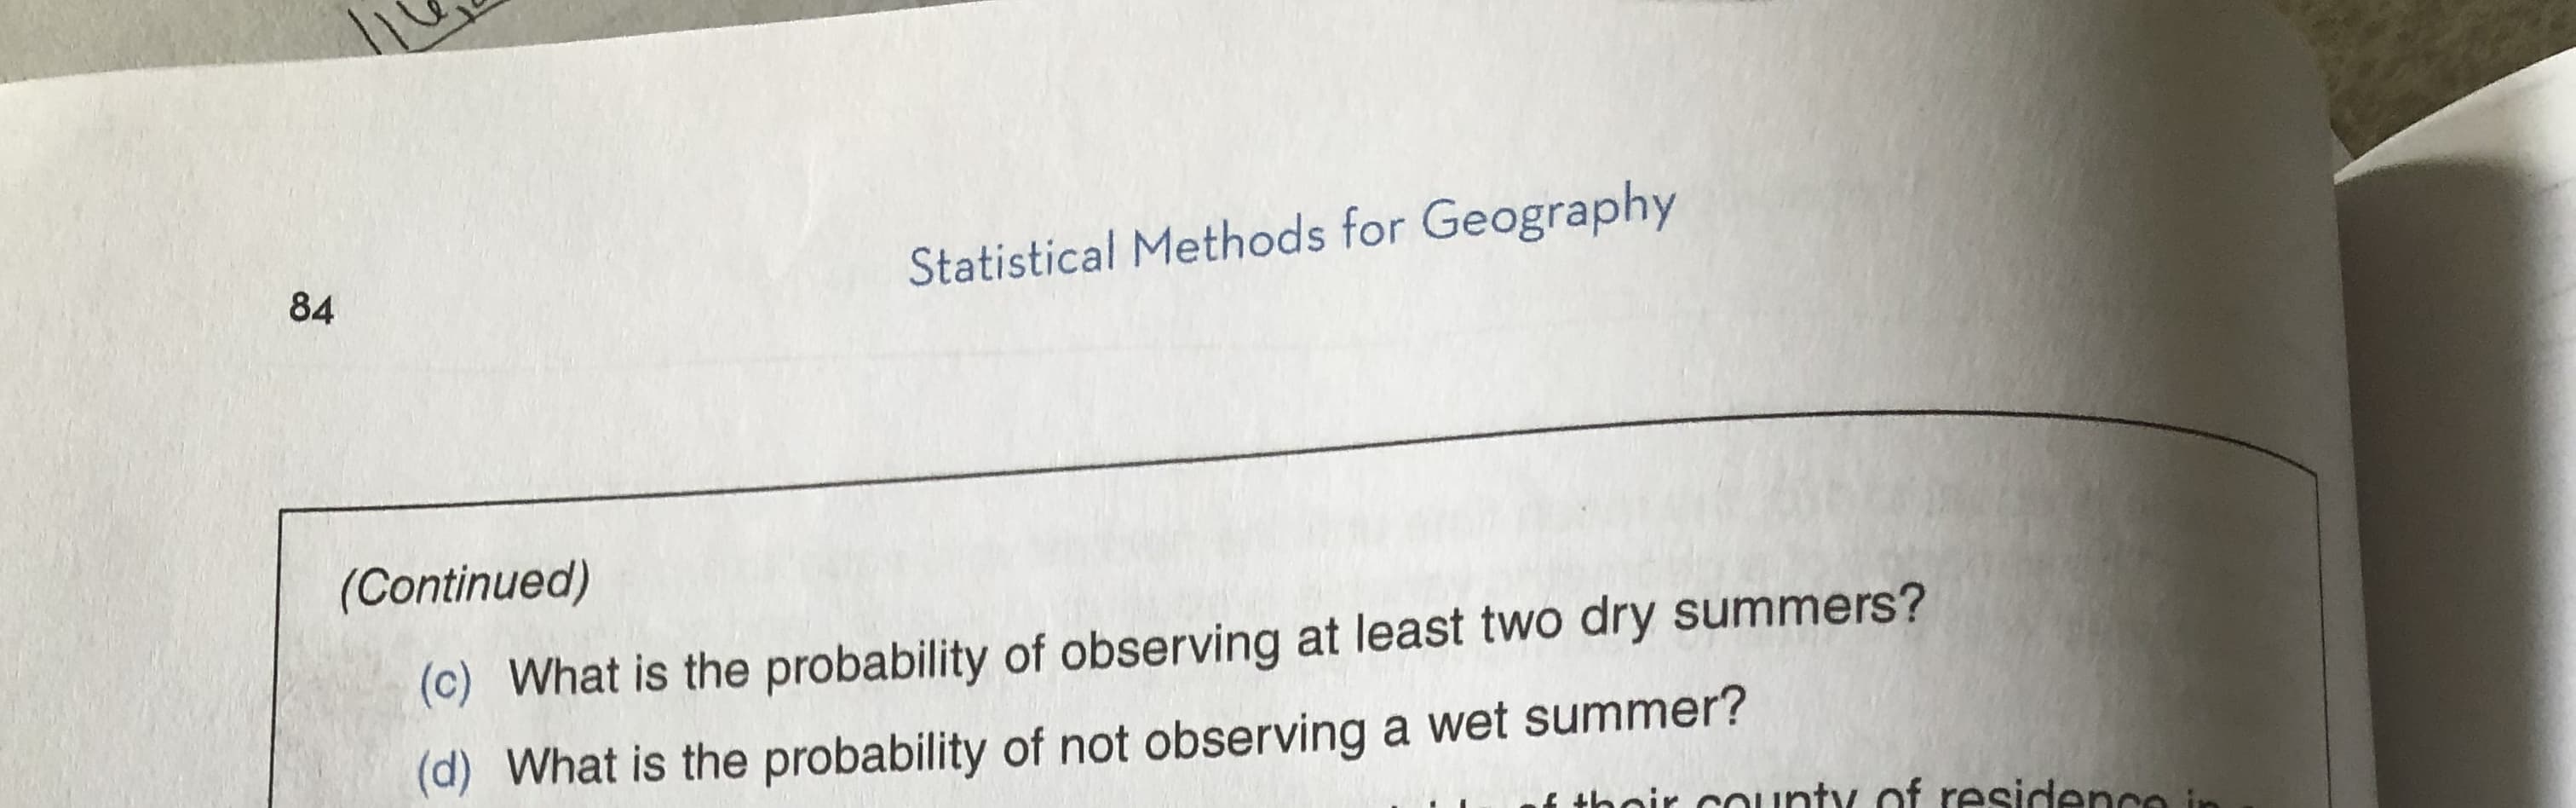 Statistical Methods for Geography
84
(Continued)
(c) What is the probability of observing at least two dry summers?
(d) What is the probability of not observing a wet summer?
their county of residence in
